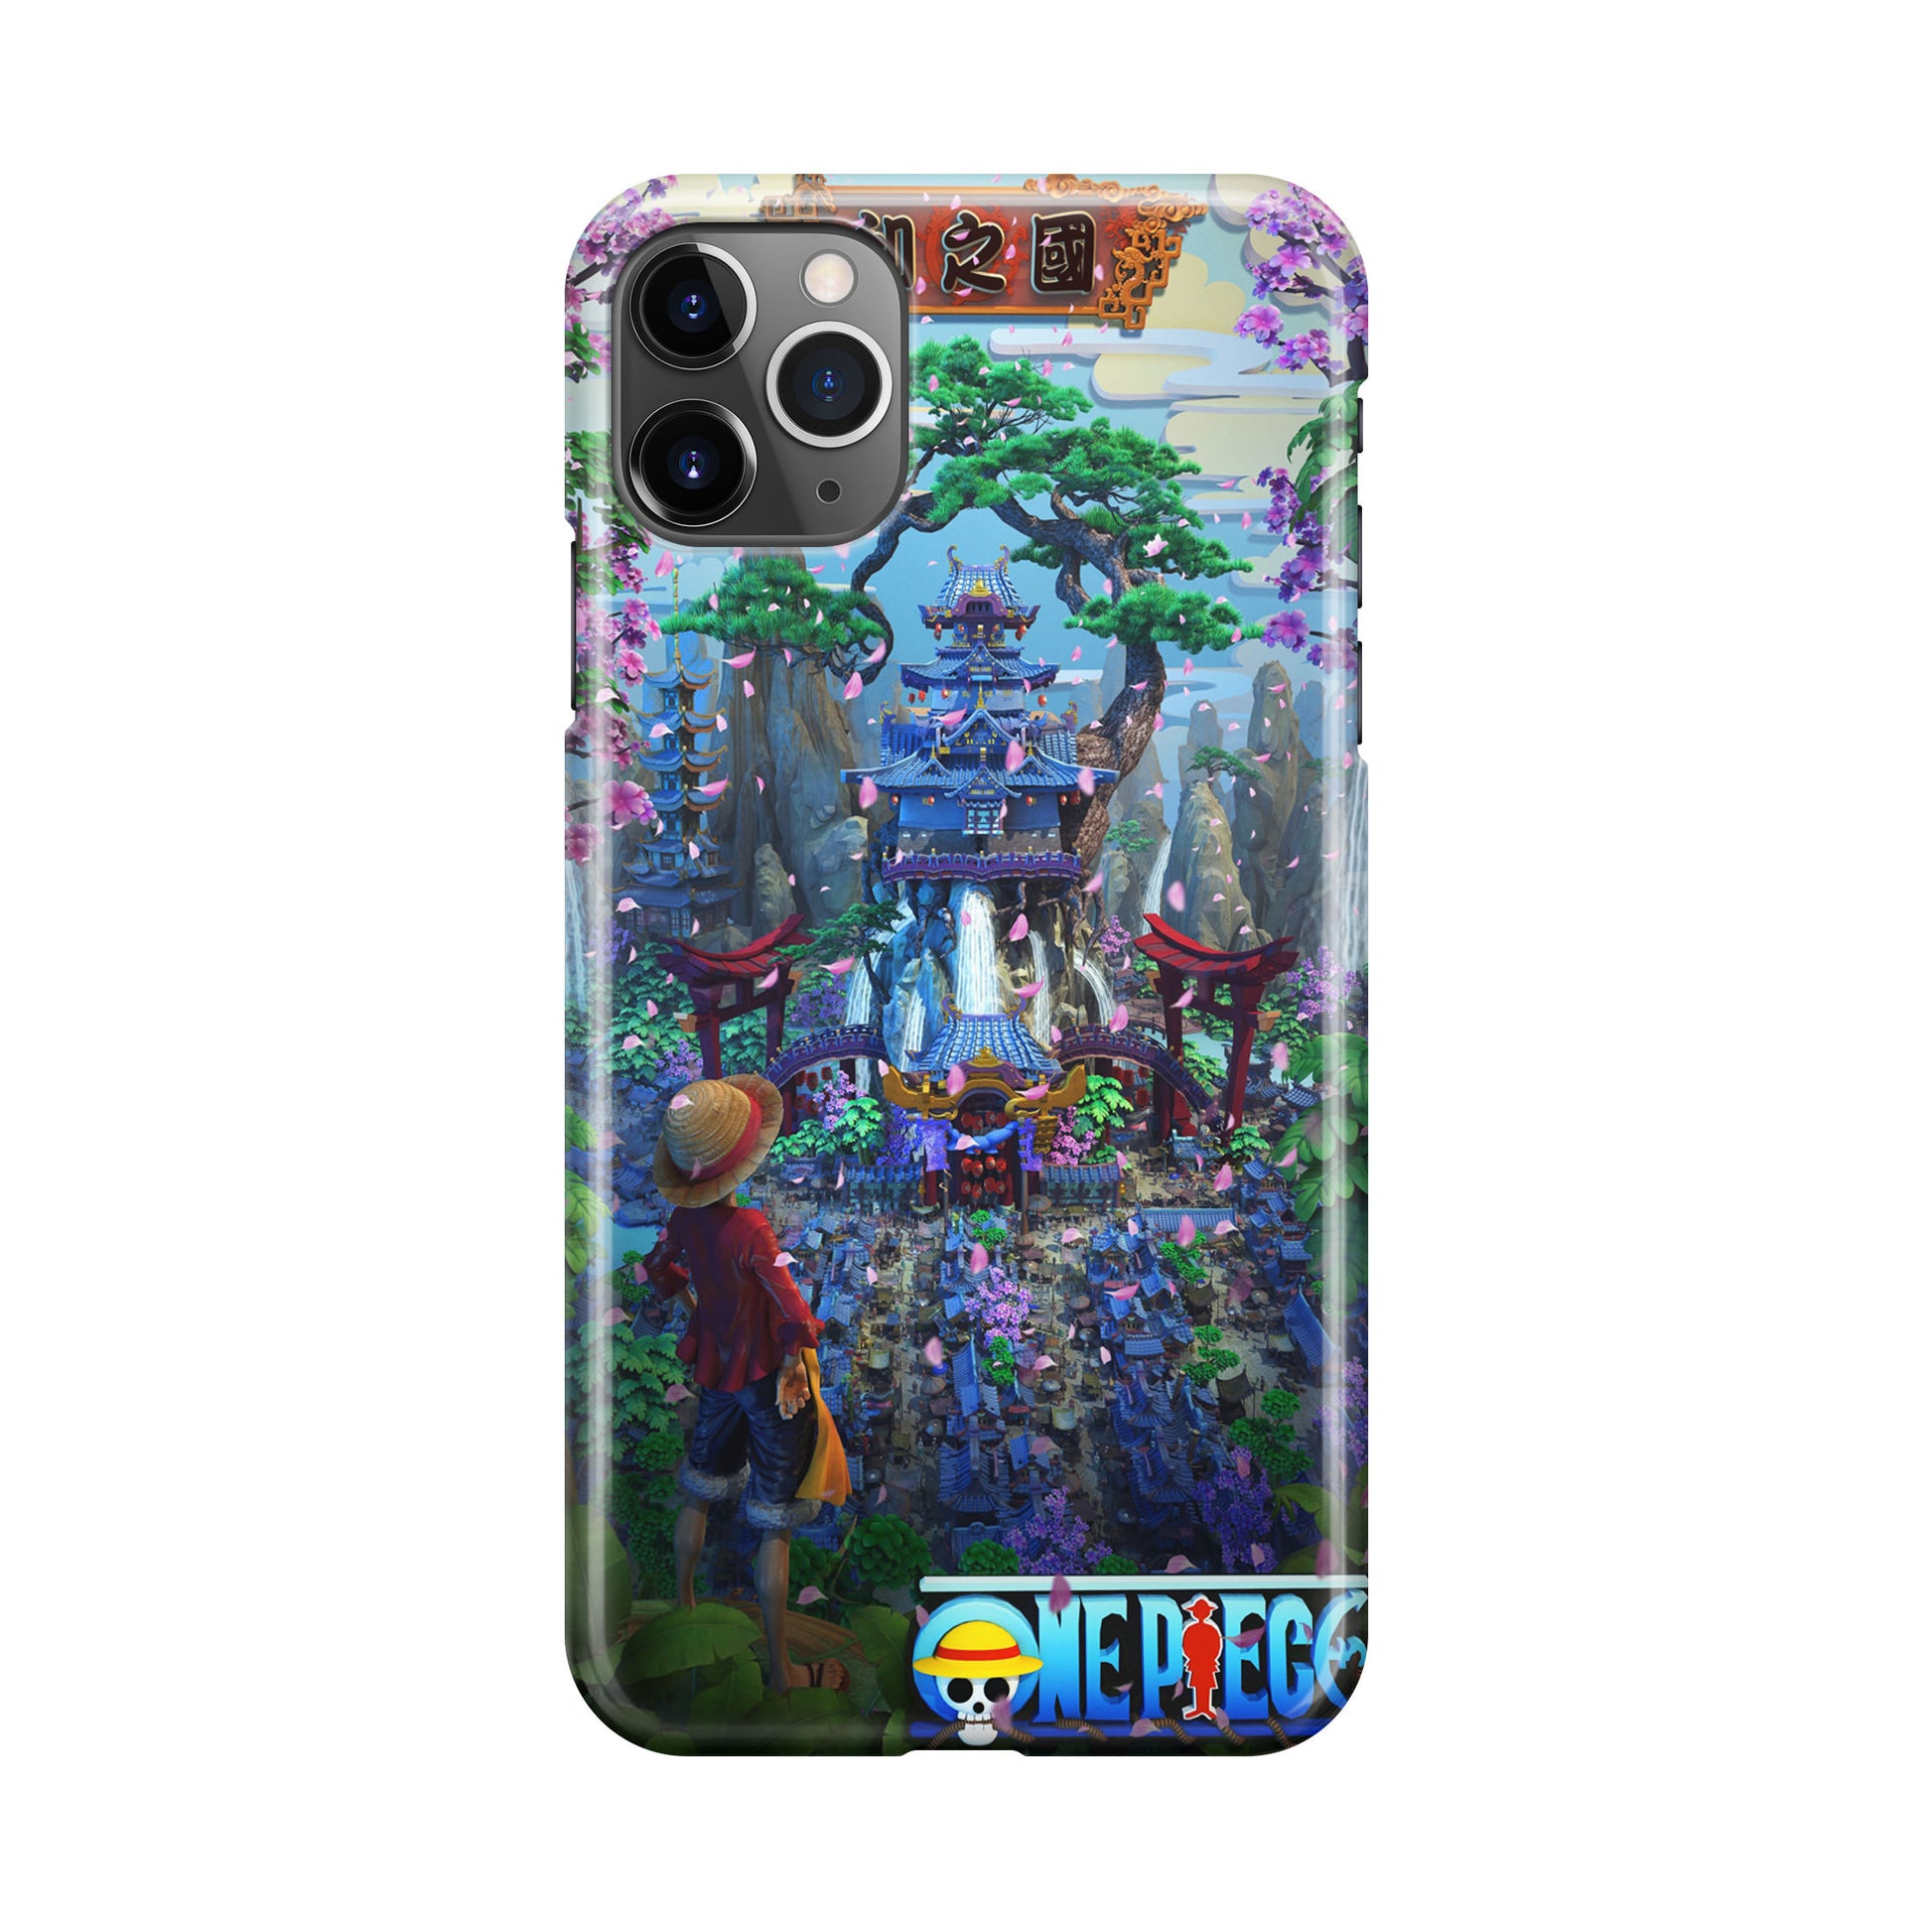 Flower Capital of Wano One Piece iPhone 11 Pro Max Case